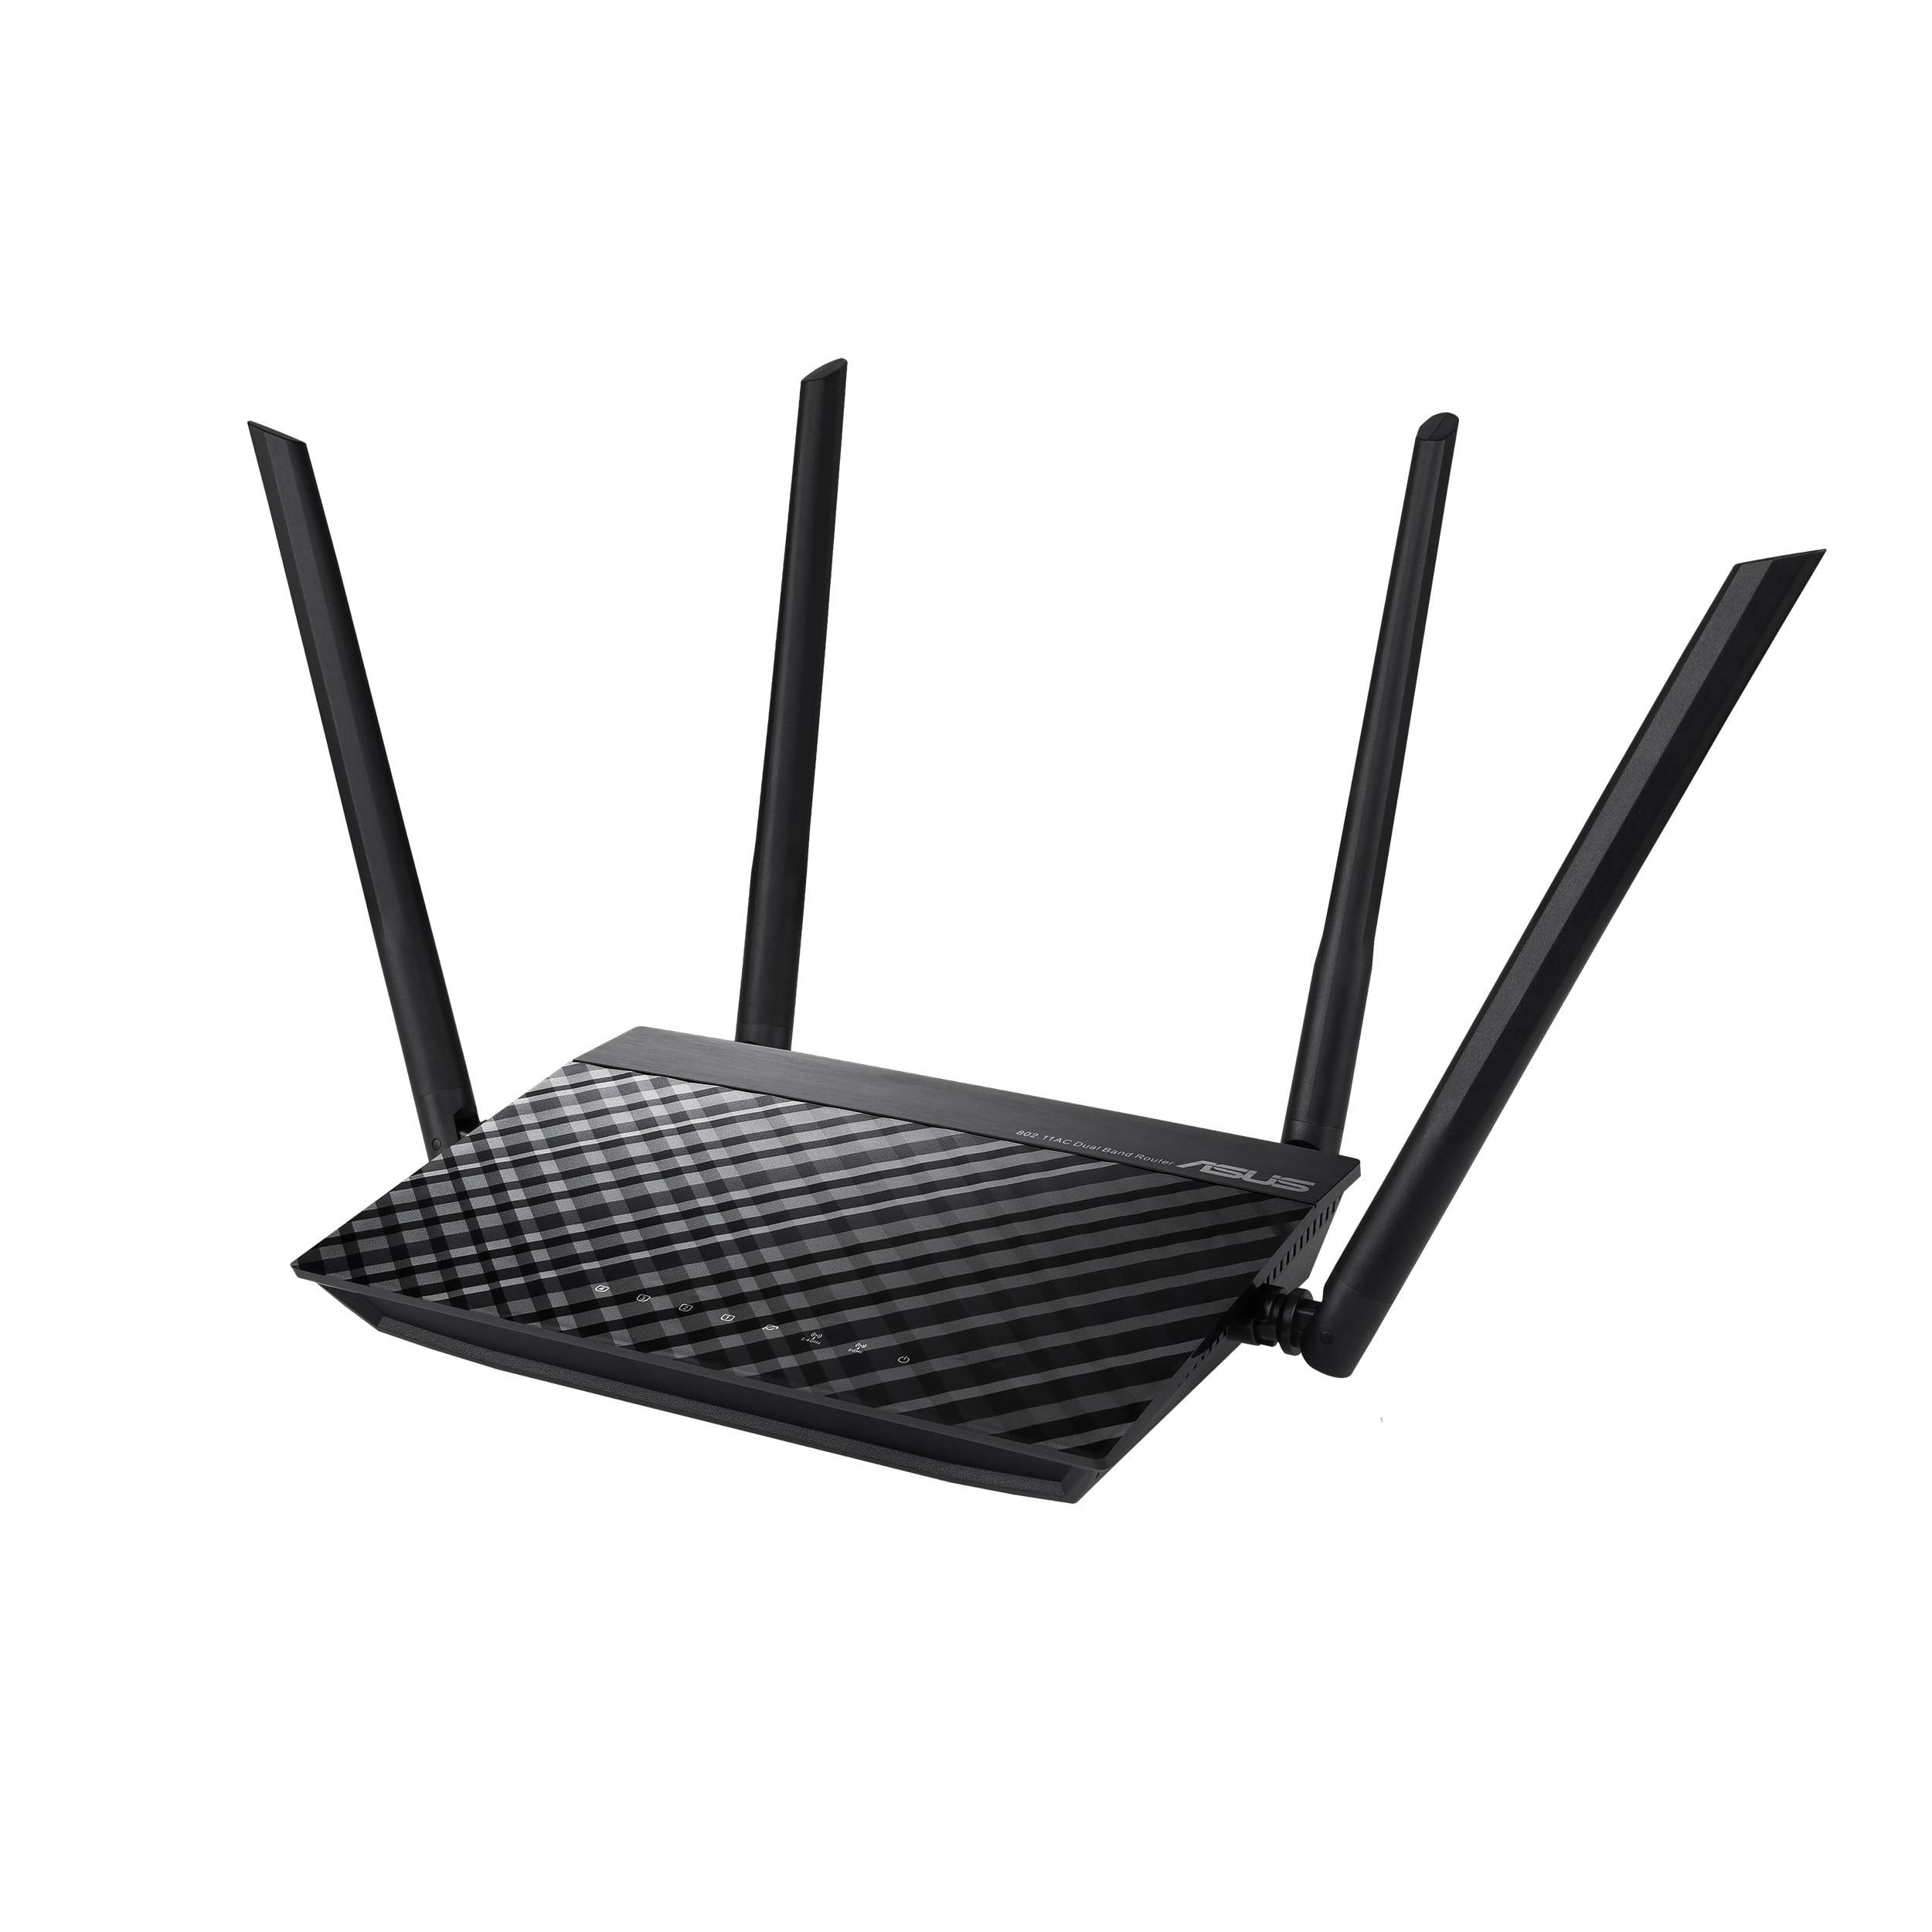 ASUS RT-AC1200GE Gigabit Ethernet Dual-band Wireless Router - Black